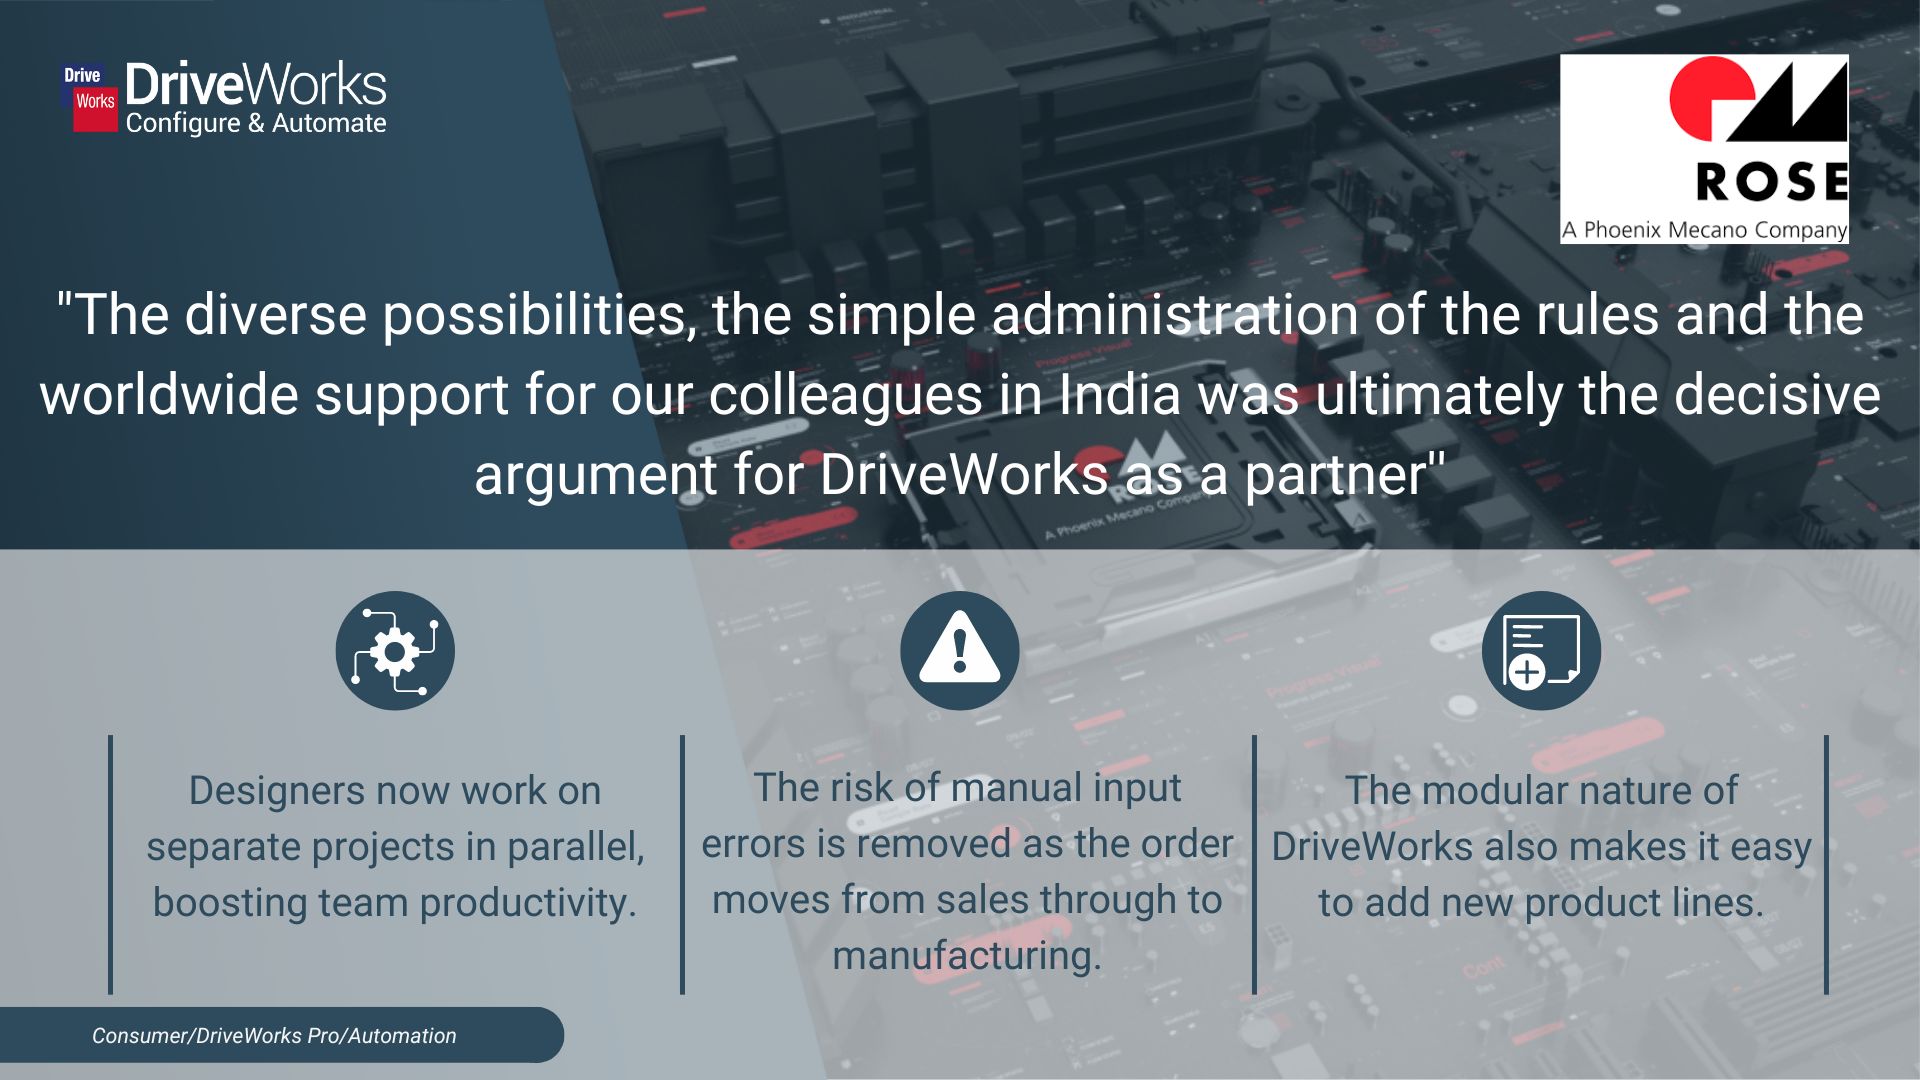 A graphic showing the benefits that ROSE Systemtechnik GmbH have experienced thanks to DriveWorks. A quote says ''The diverse possibilities, the simple administration of the rules and the worldwide support for our colleagues in India was ultimately the decisive argument for DriveWorks as a partner''. It also contains the text: Designers now work on separate projects in parallel, boosting team productivity. The risk of manual input errors is removed as the order moves from sales through to manufacturing. The modular nature of DriveWorks also makes it easy to add new product lines.